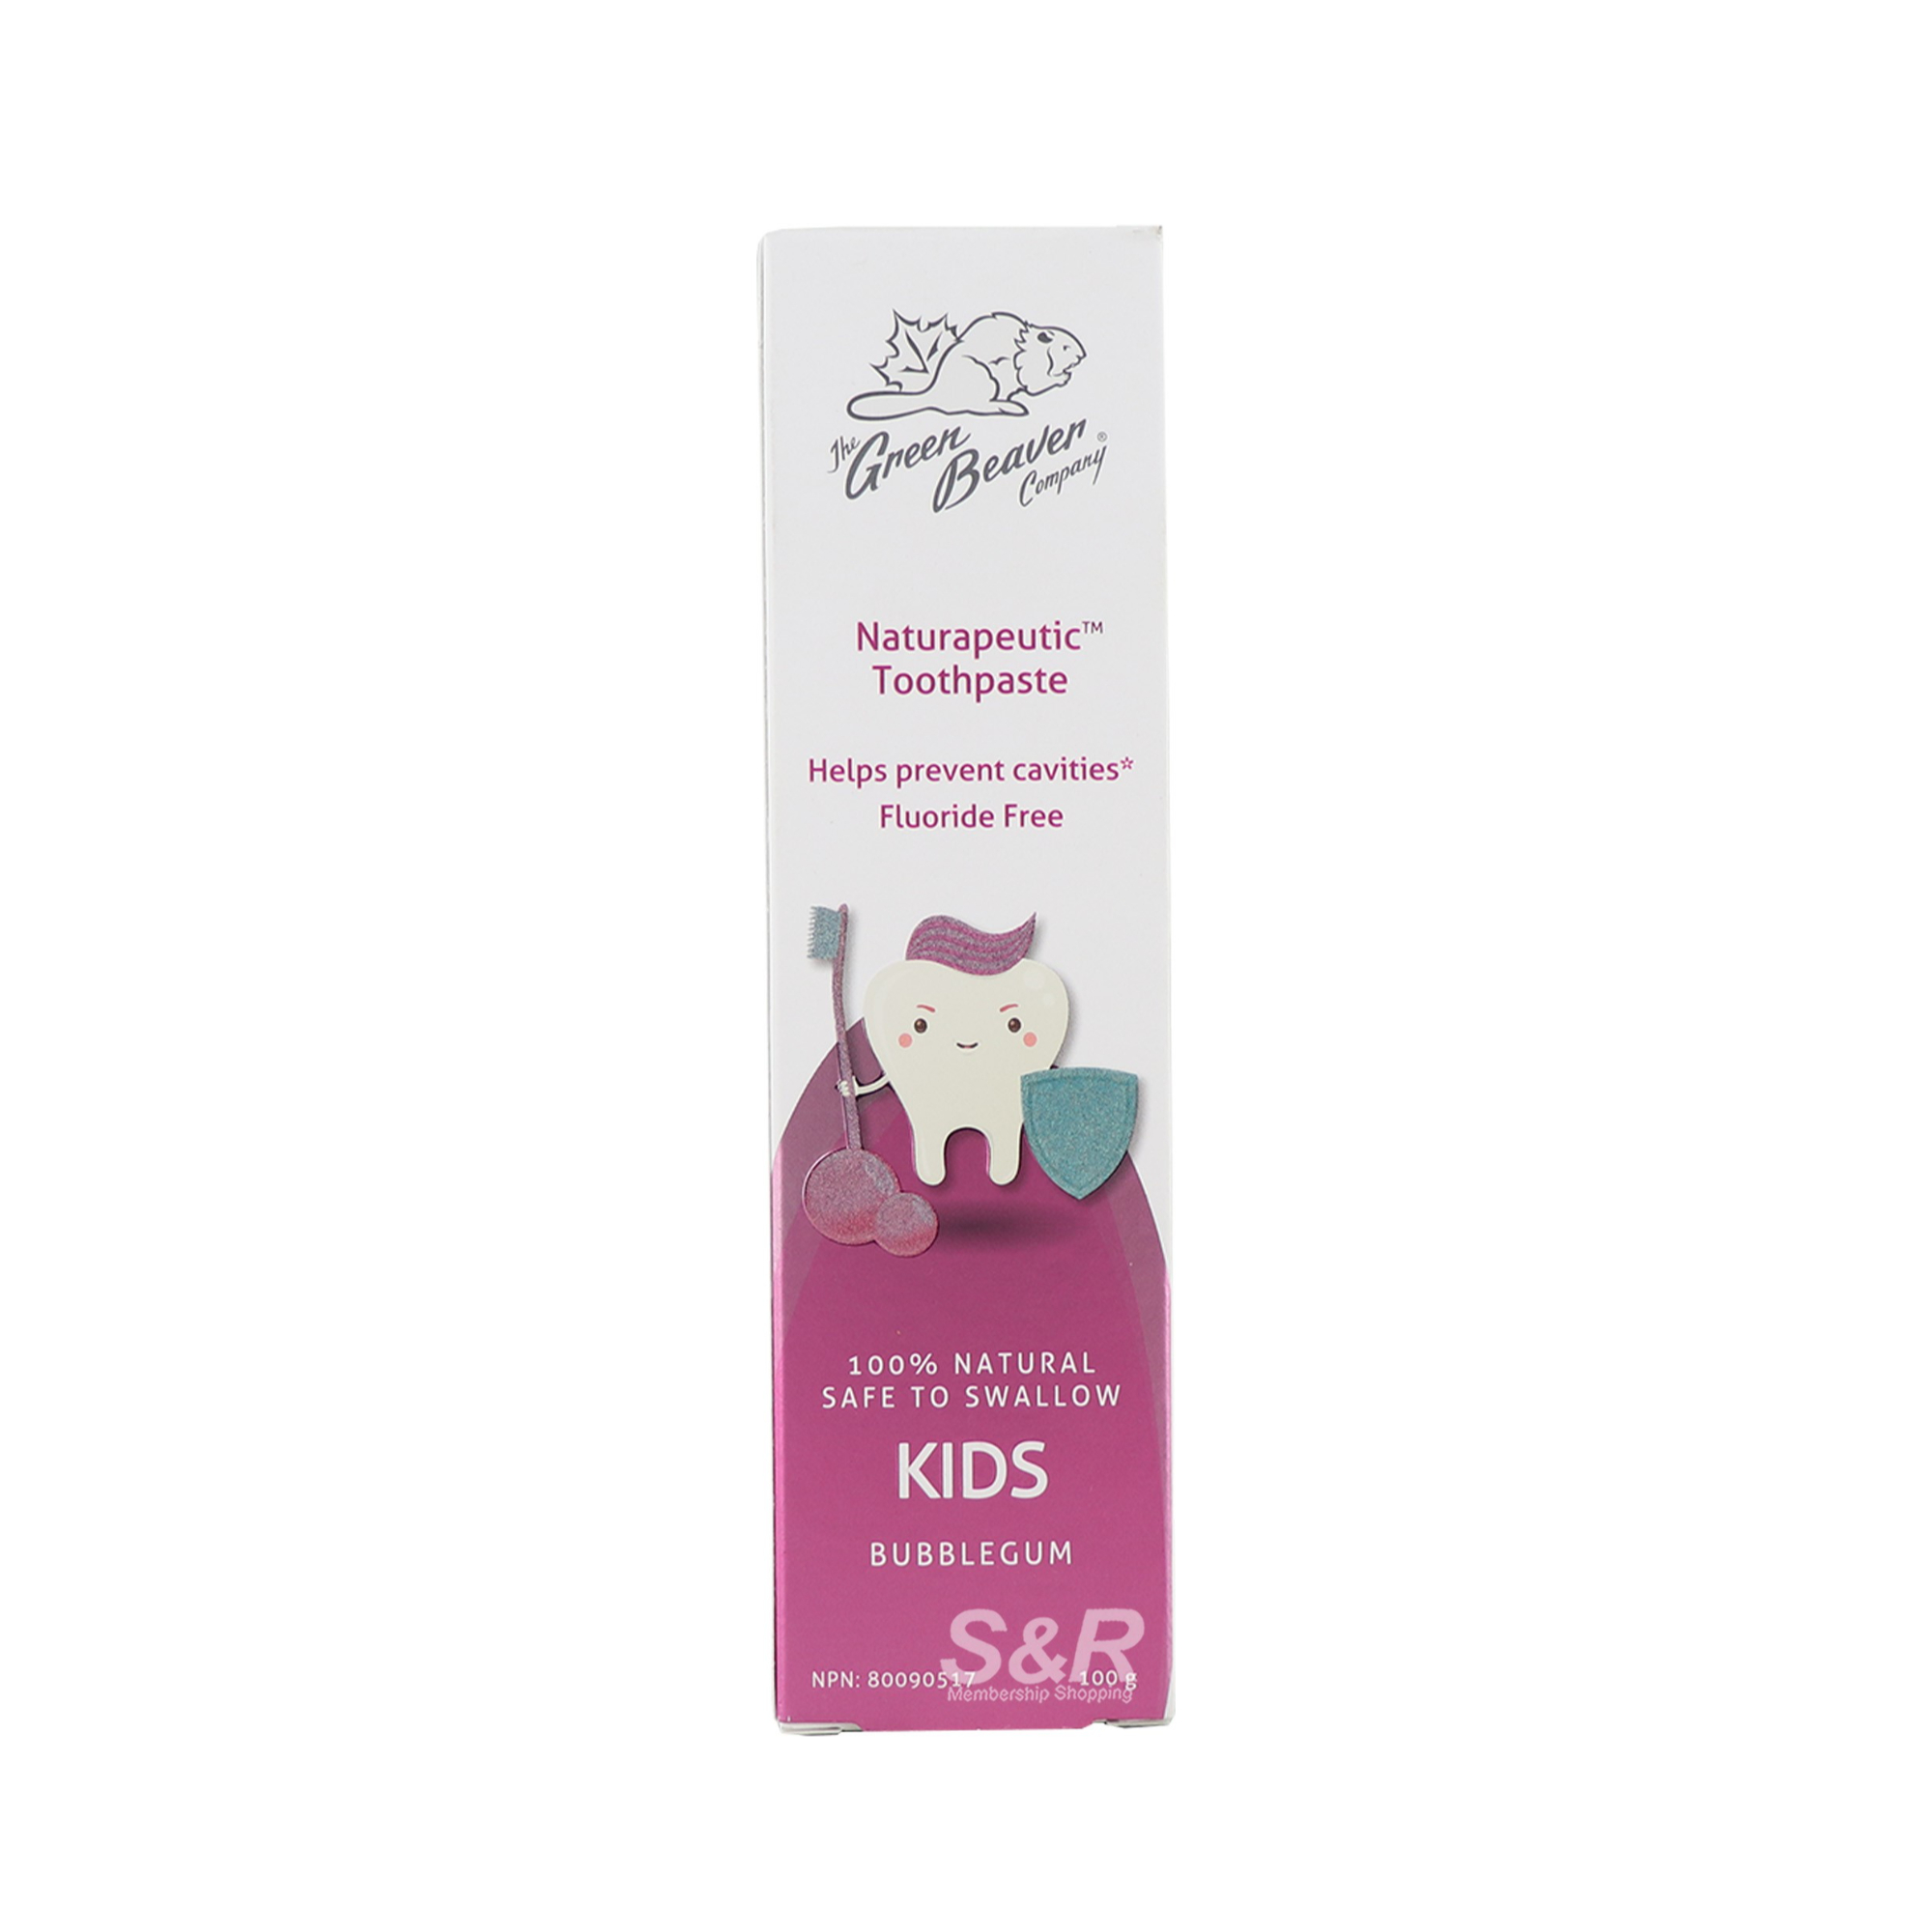 The Green Beaver Company Naturapeutic Kids Toothpaste 100g